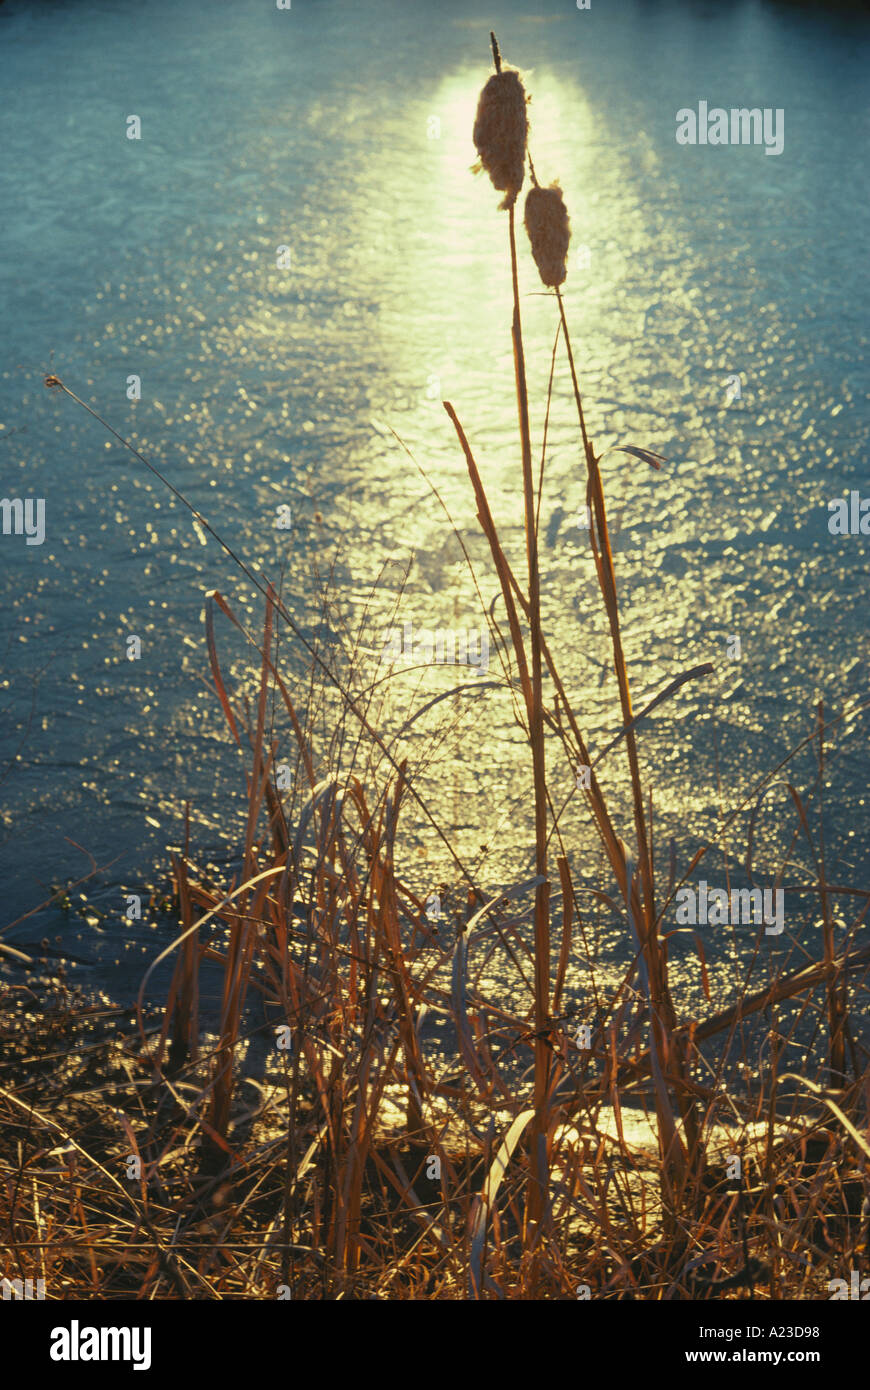 Cattails,Typha latifolia, stand backlighted on a frozen lake haloed in the waning afternoon light, Missouri, USA Stock Photo